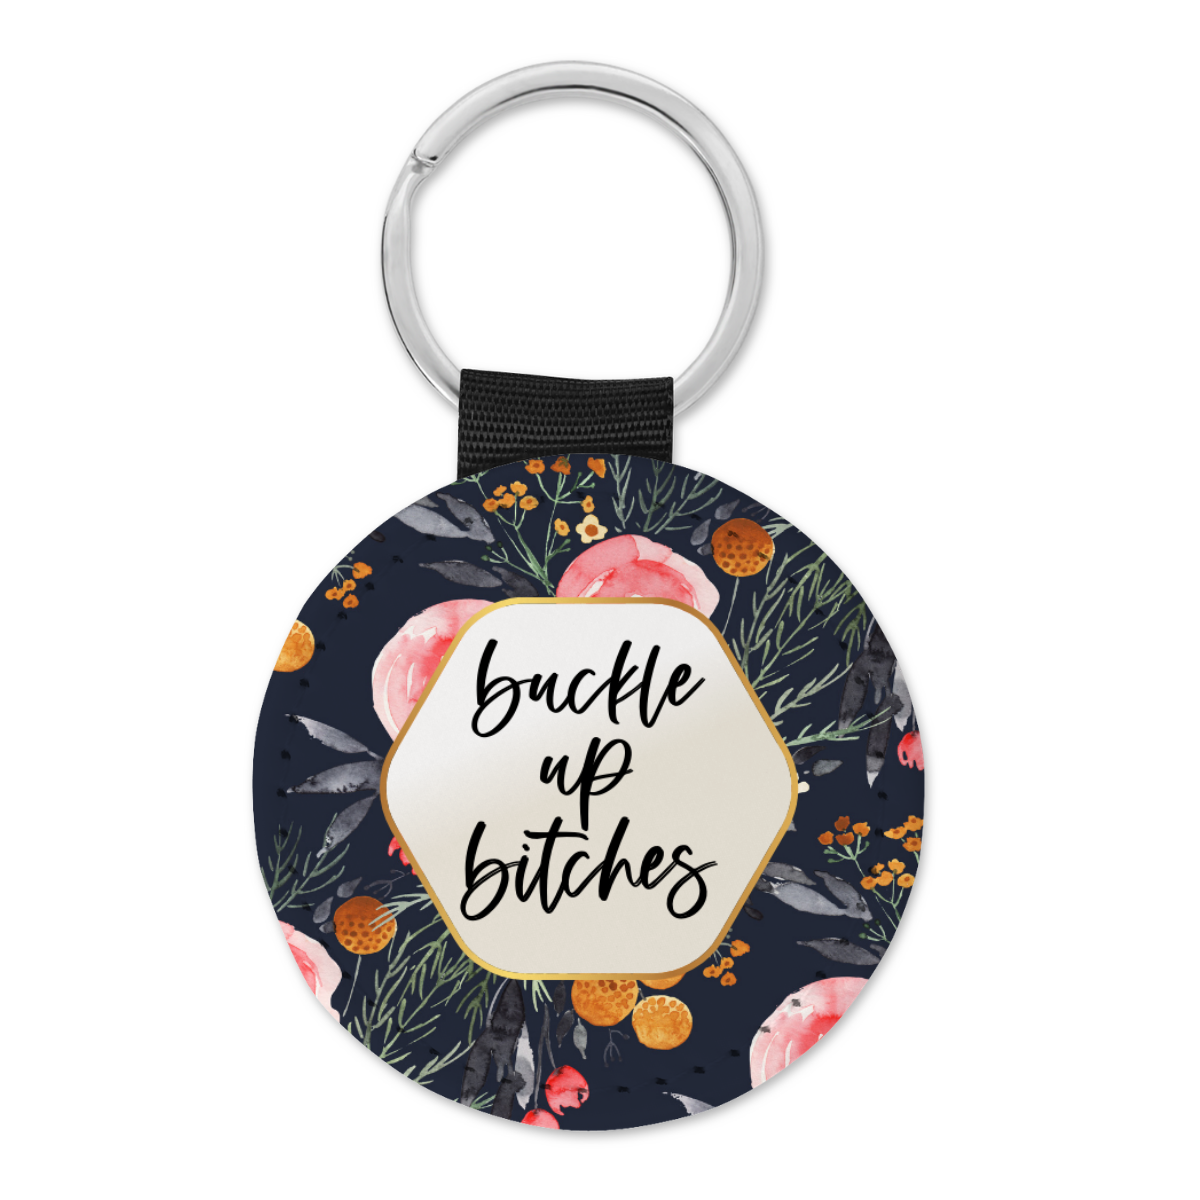 Buckle Up Bitches | Keyring - The Pretty Things.ca